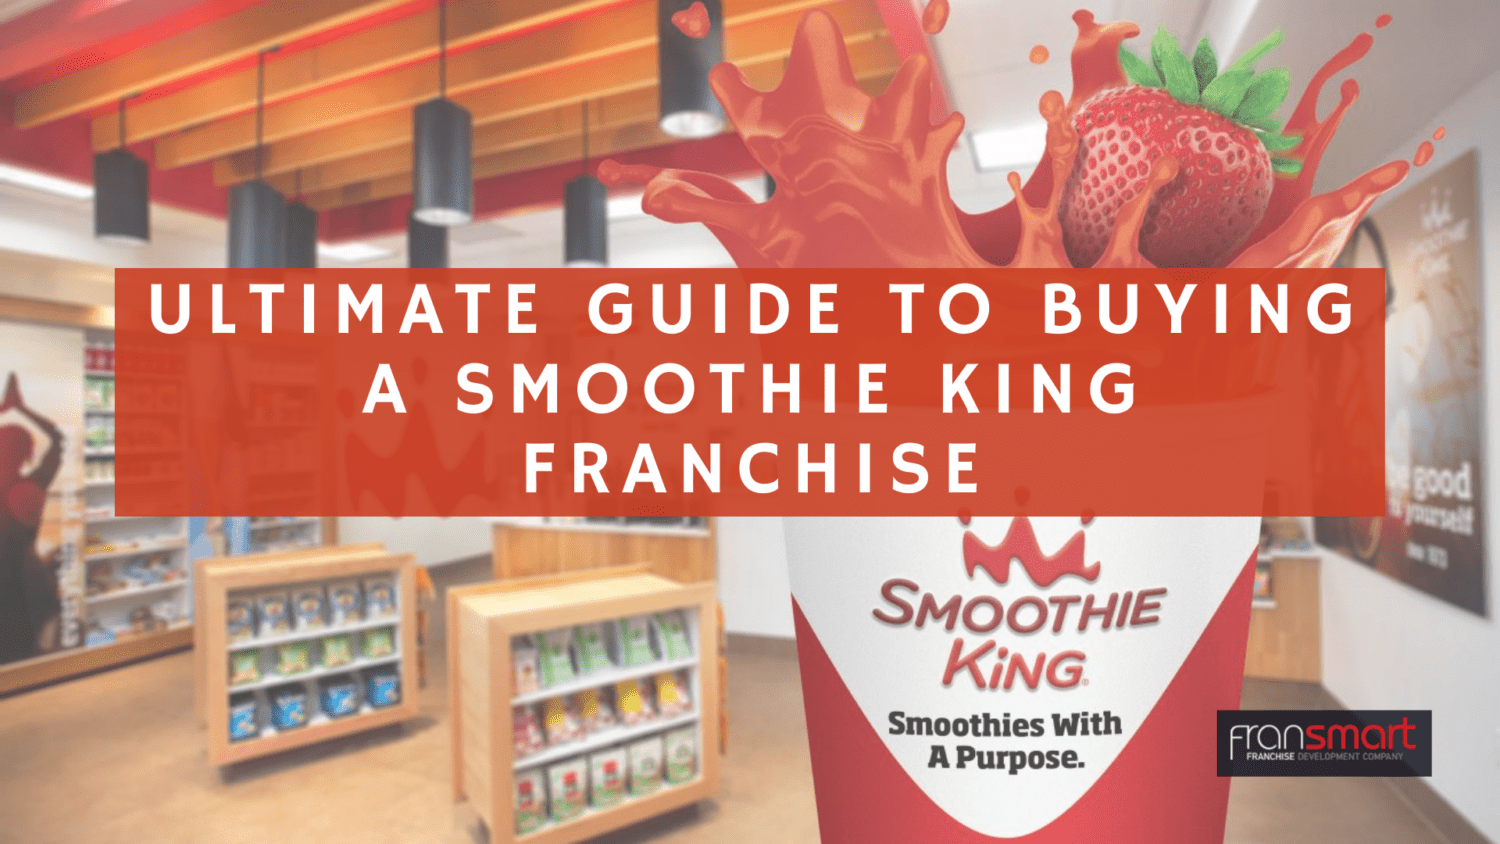 Ultimate Guide to Buying a Smoothie King Franchise